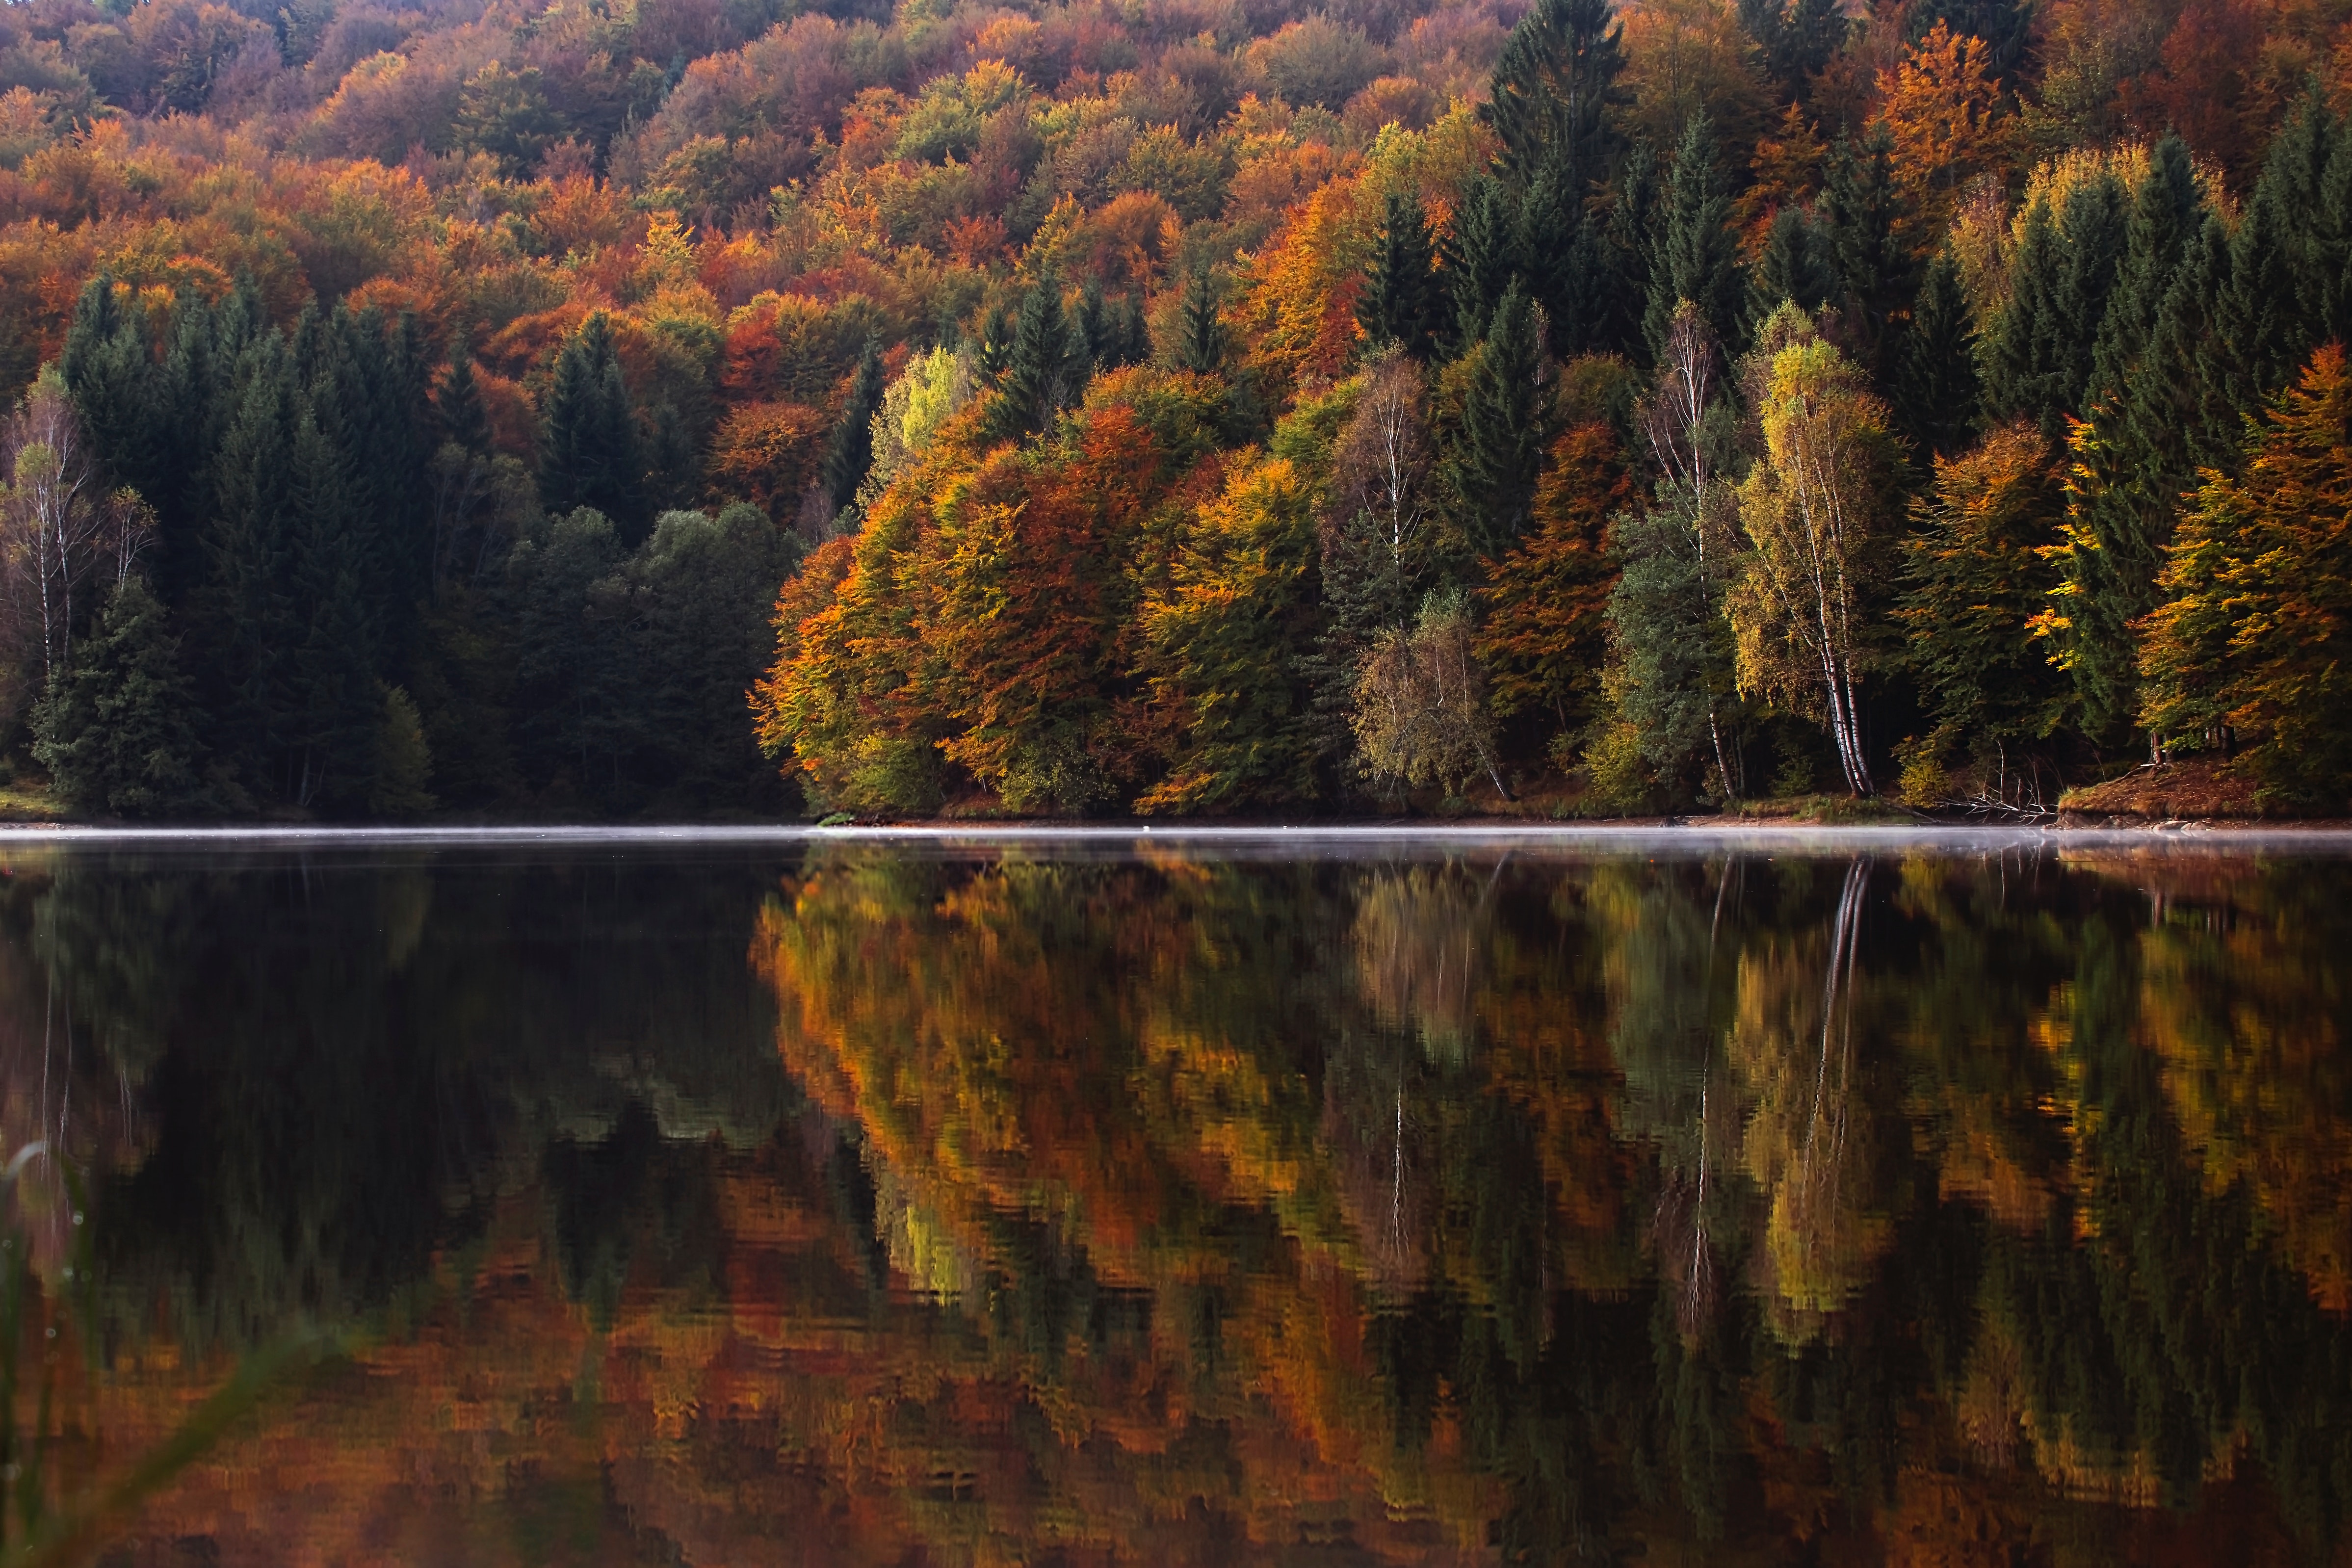 Body of Water Near Orange and Green Leaf Trees, Autumnal, Reflection, Wood, Water, HQ Photo